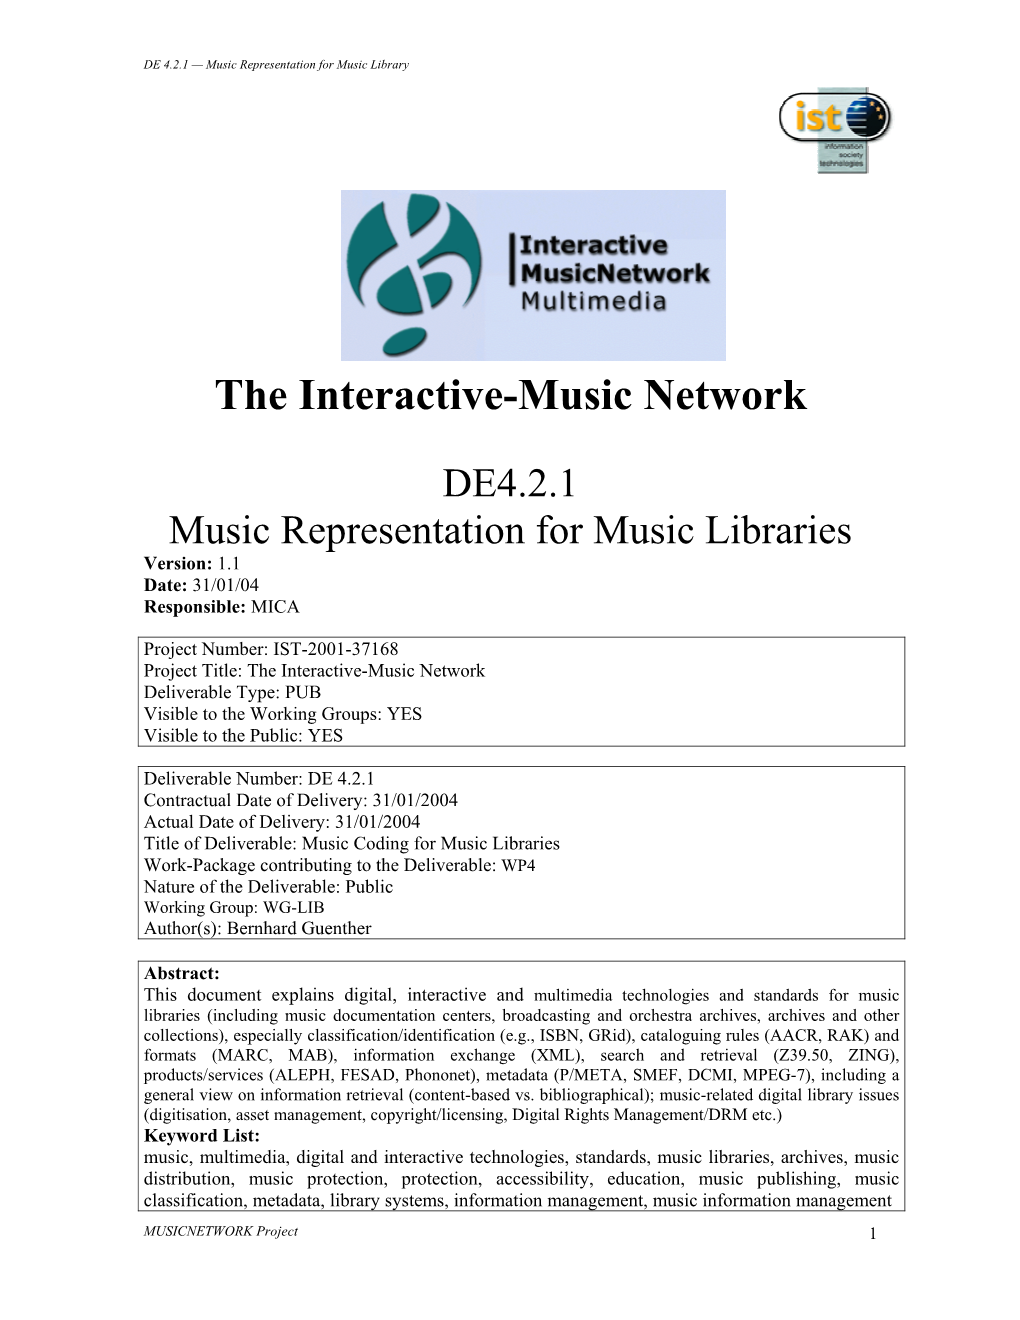 The Interactive-Music Network